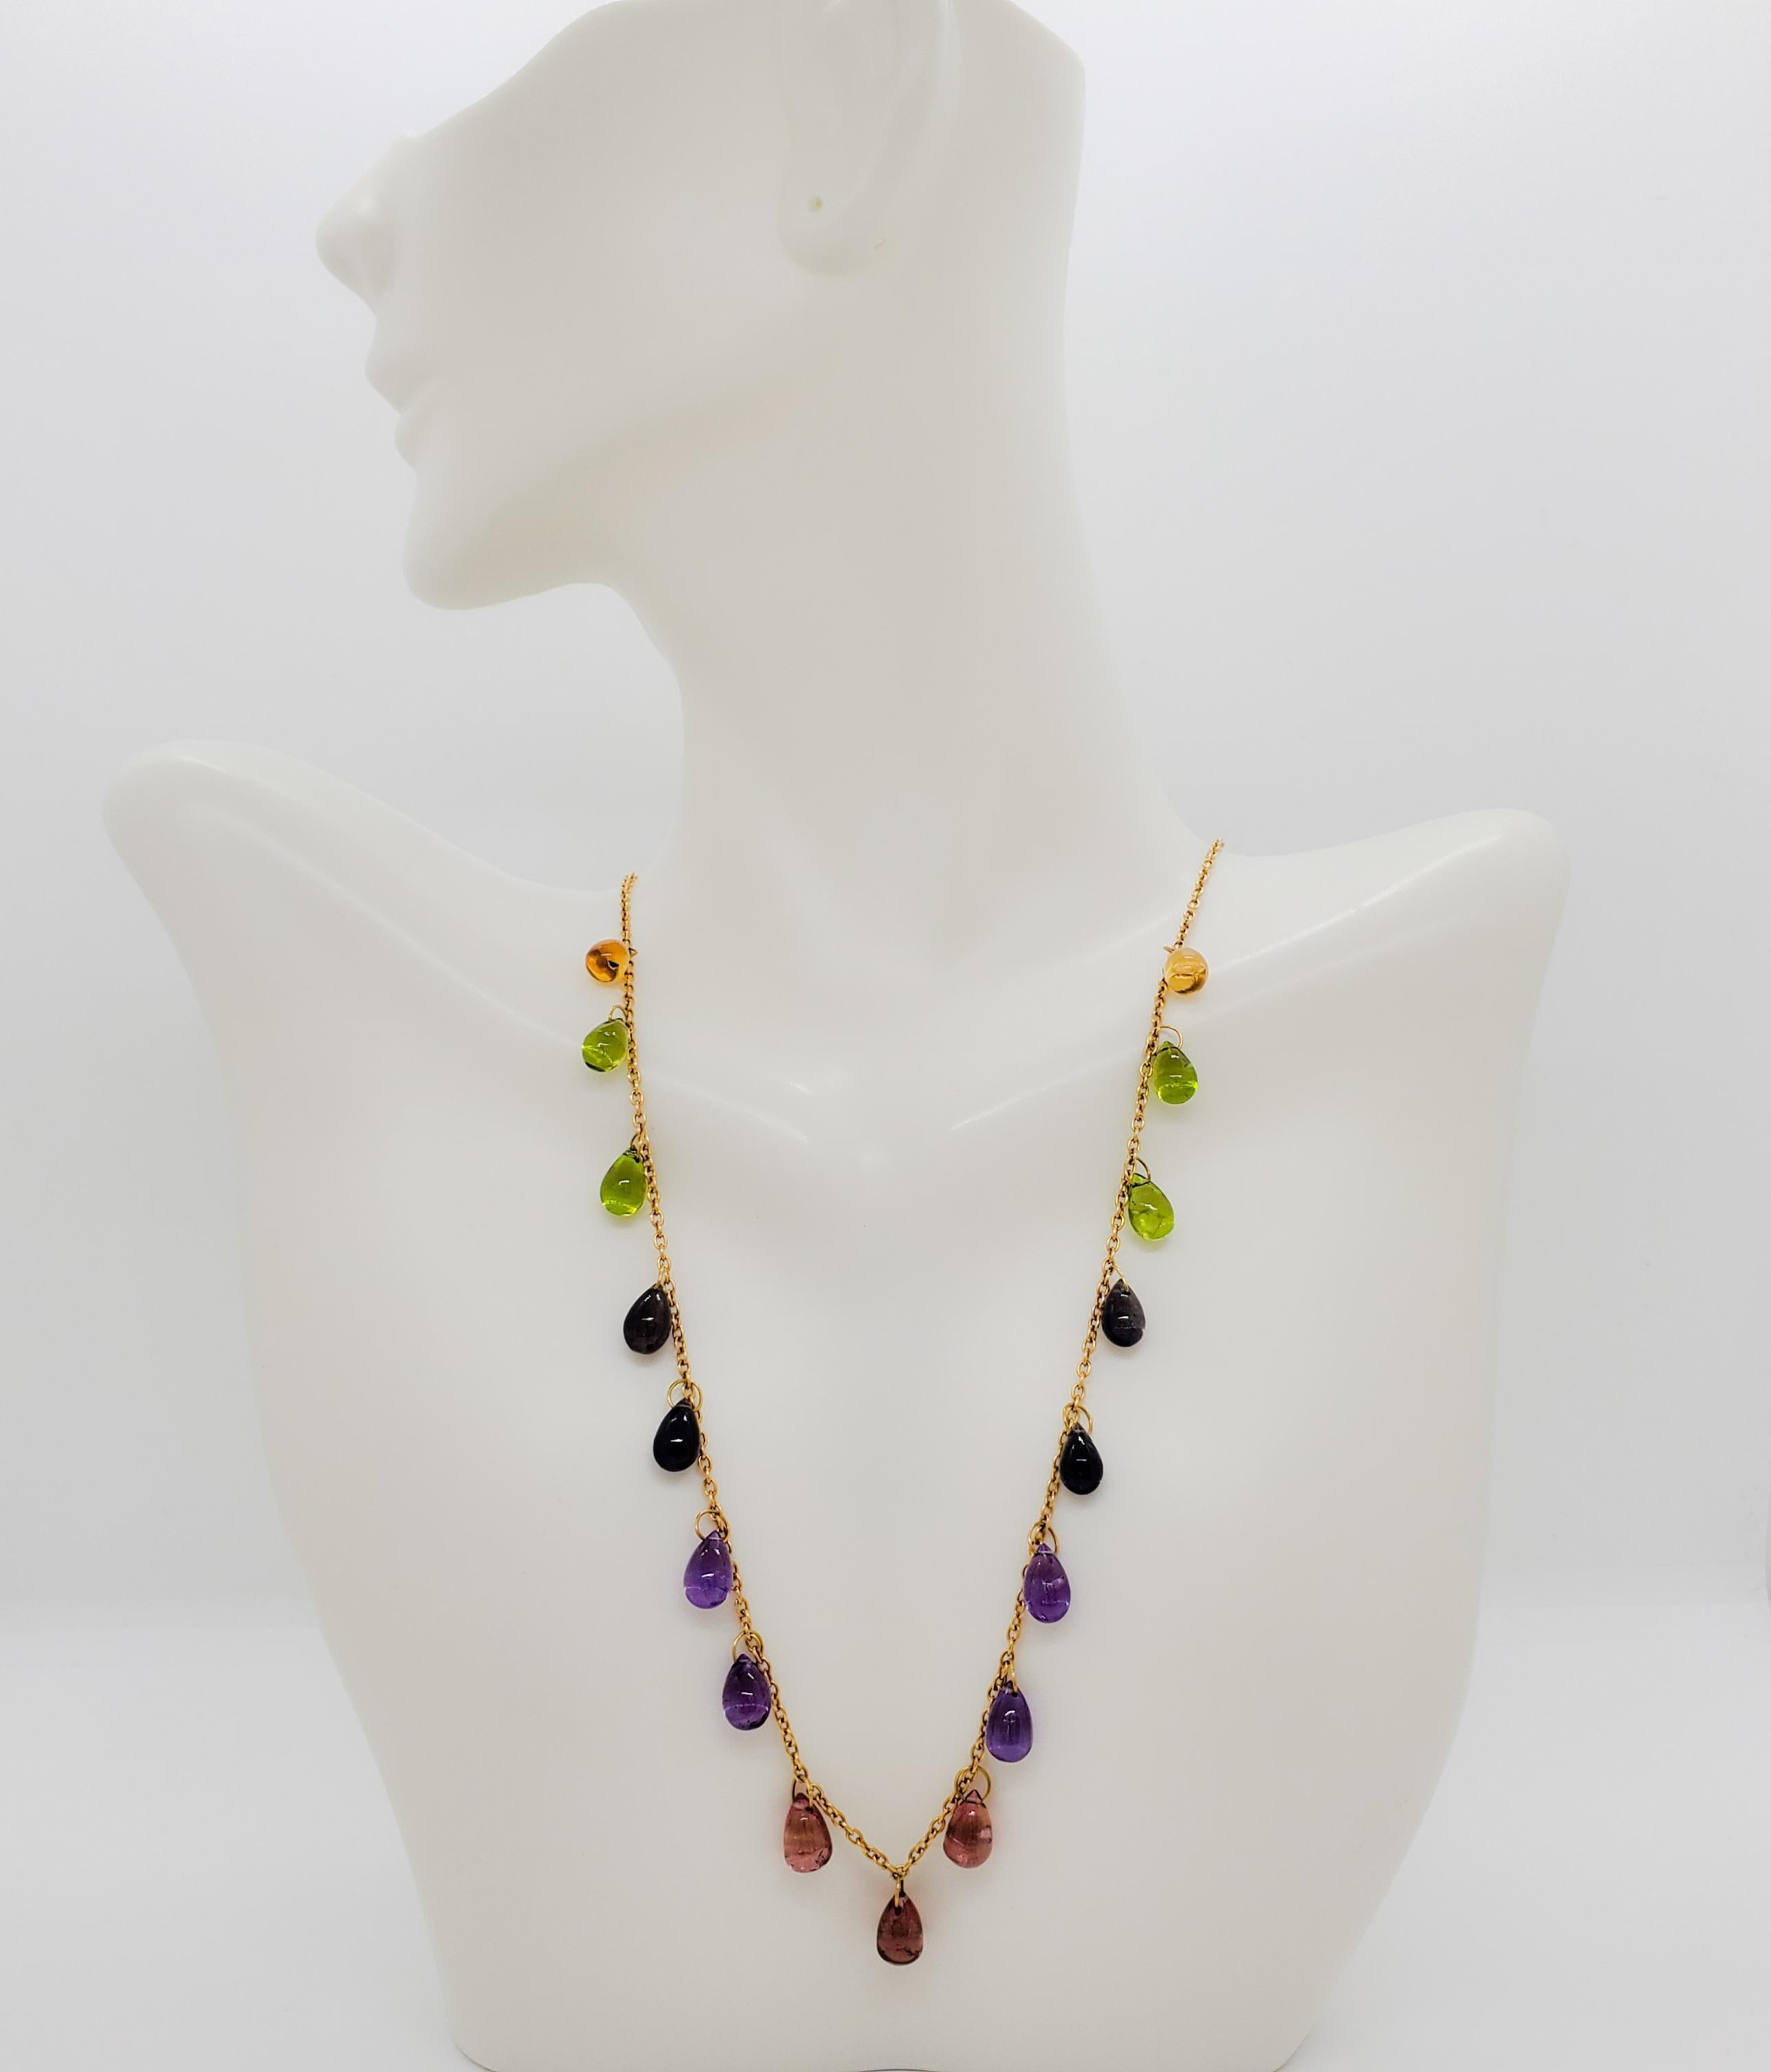 Gorgeous H. Stern necklace with a wide variety of multi color gemstones and 0.01 ct. good quality white diamond round.  Handmade in 18k yellow gold.  Length 18